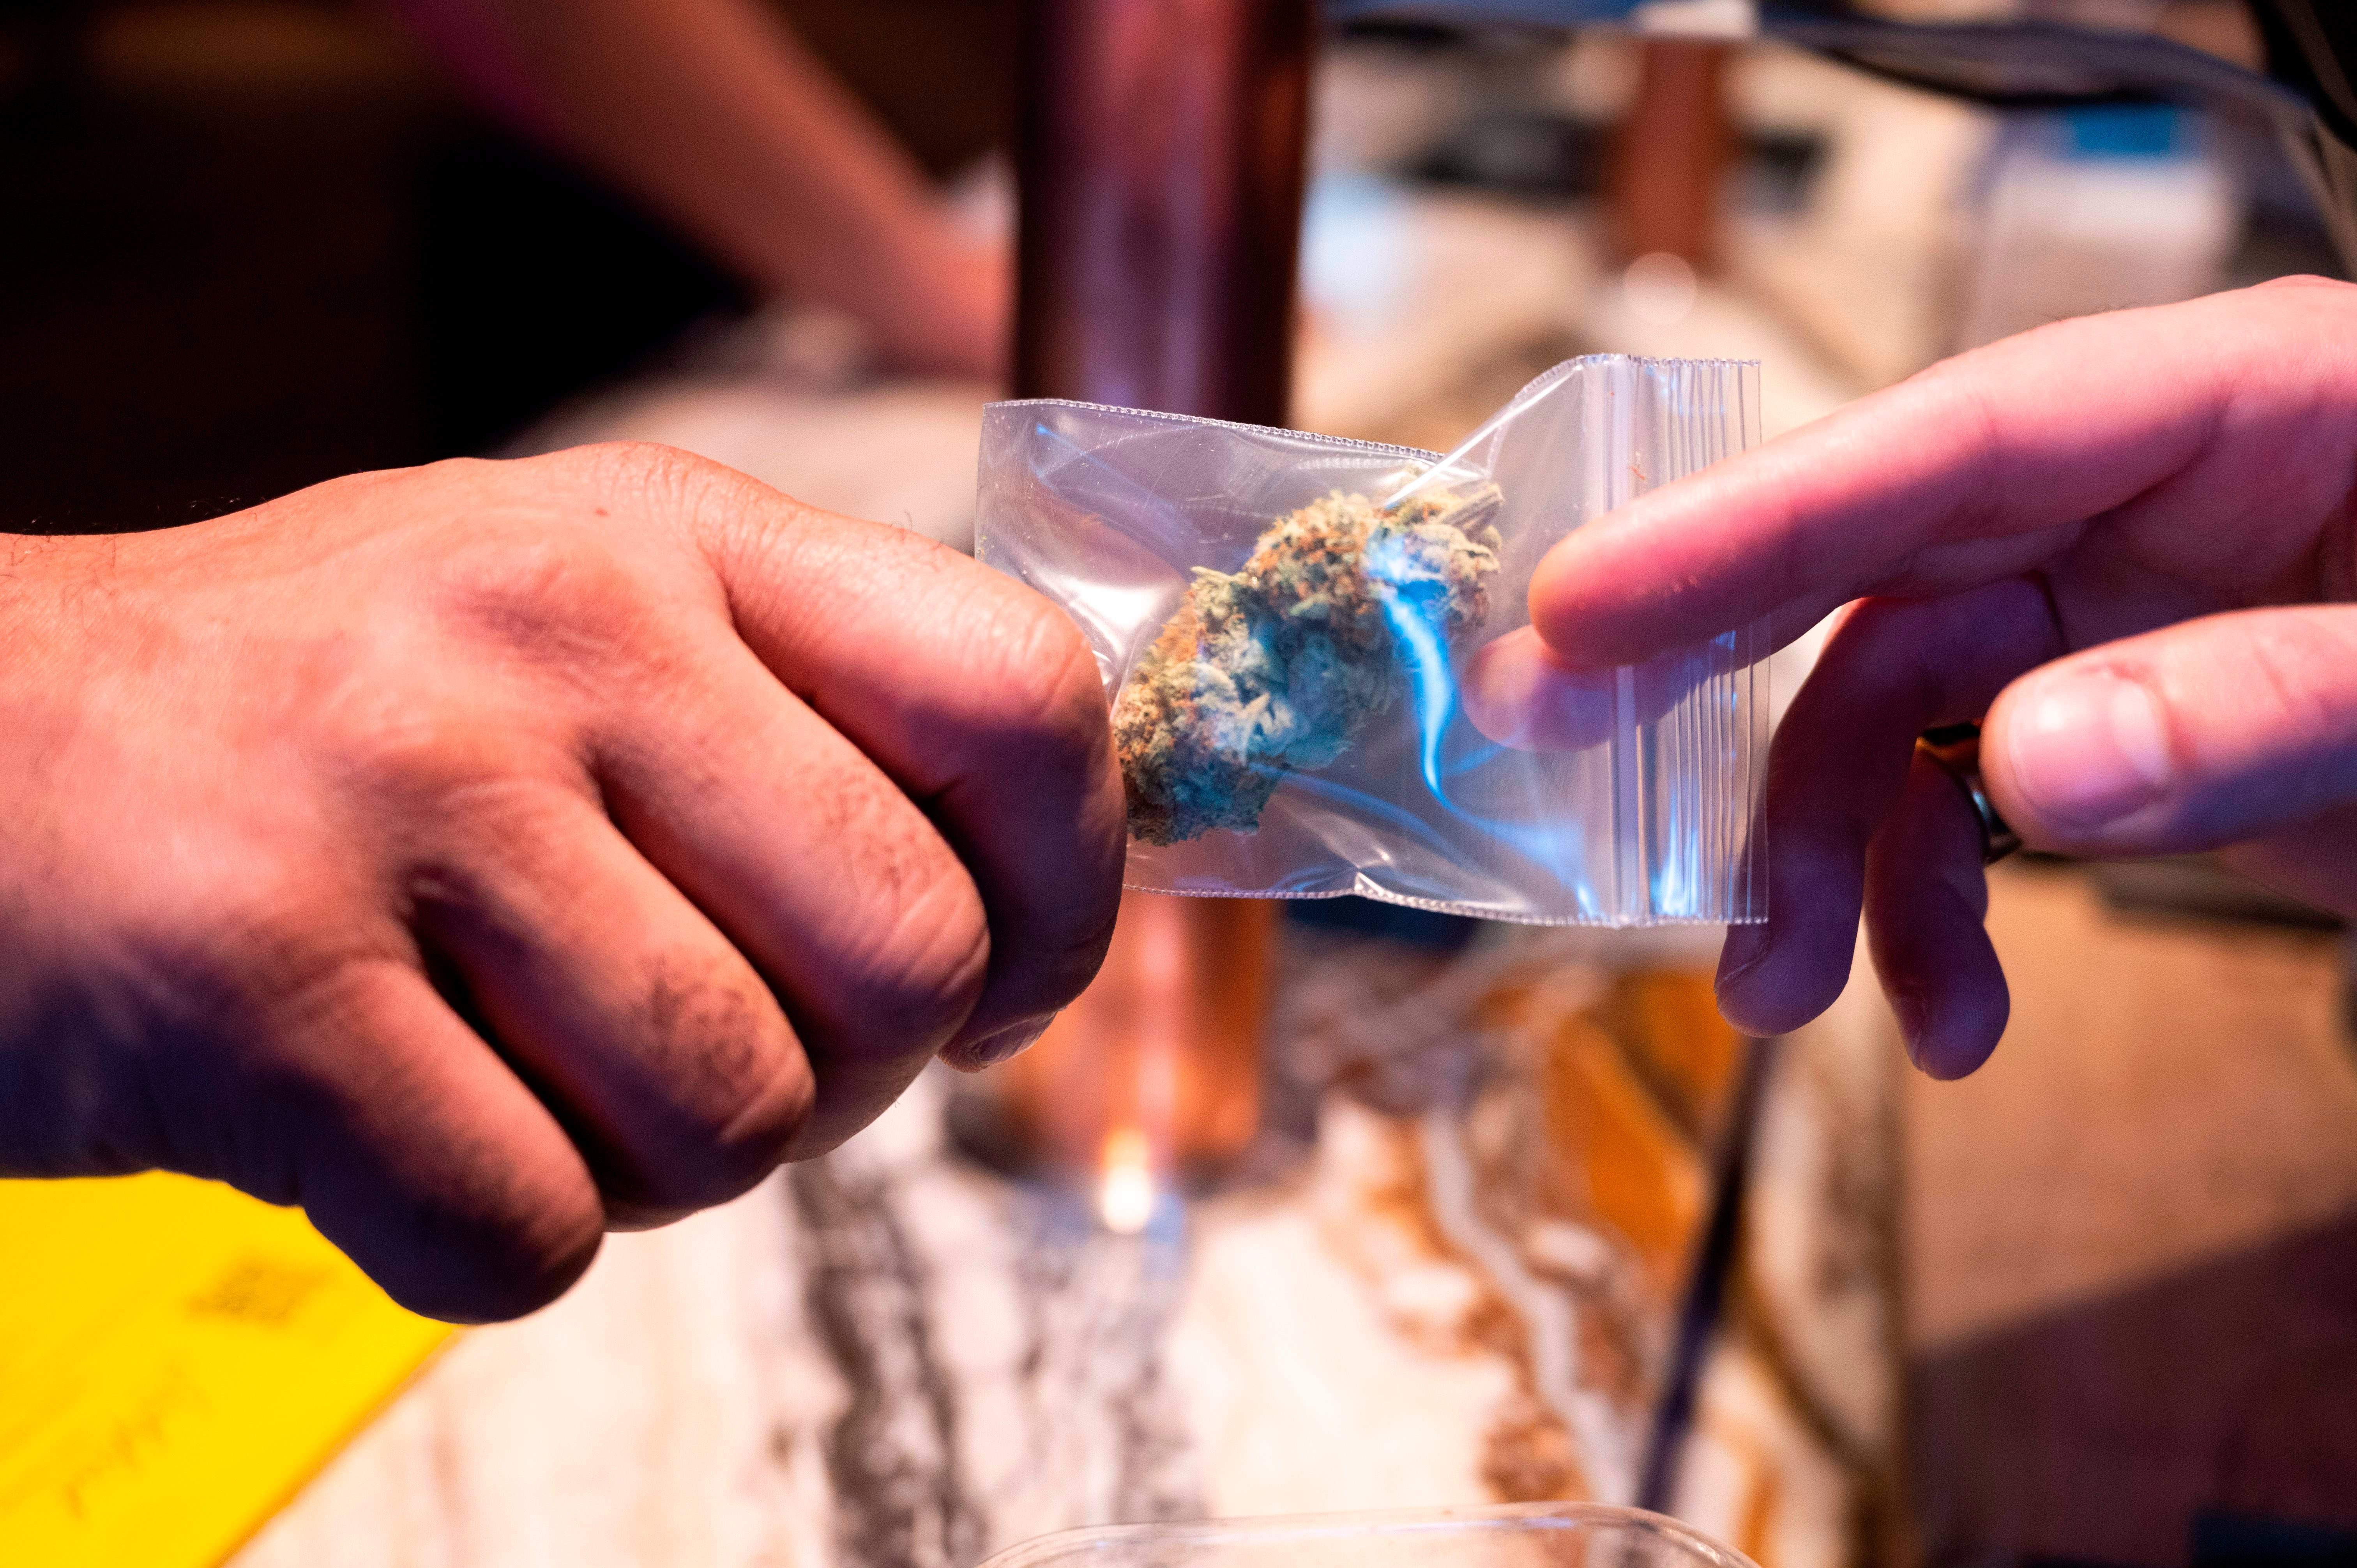 The Dutch government decided to tolerate small amounts of cannabis possession for recreational use